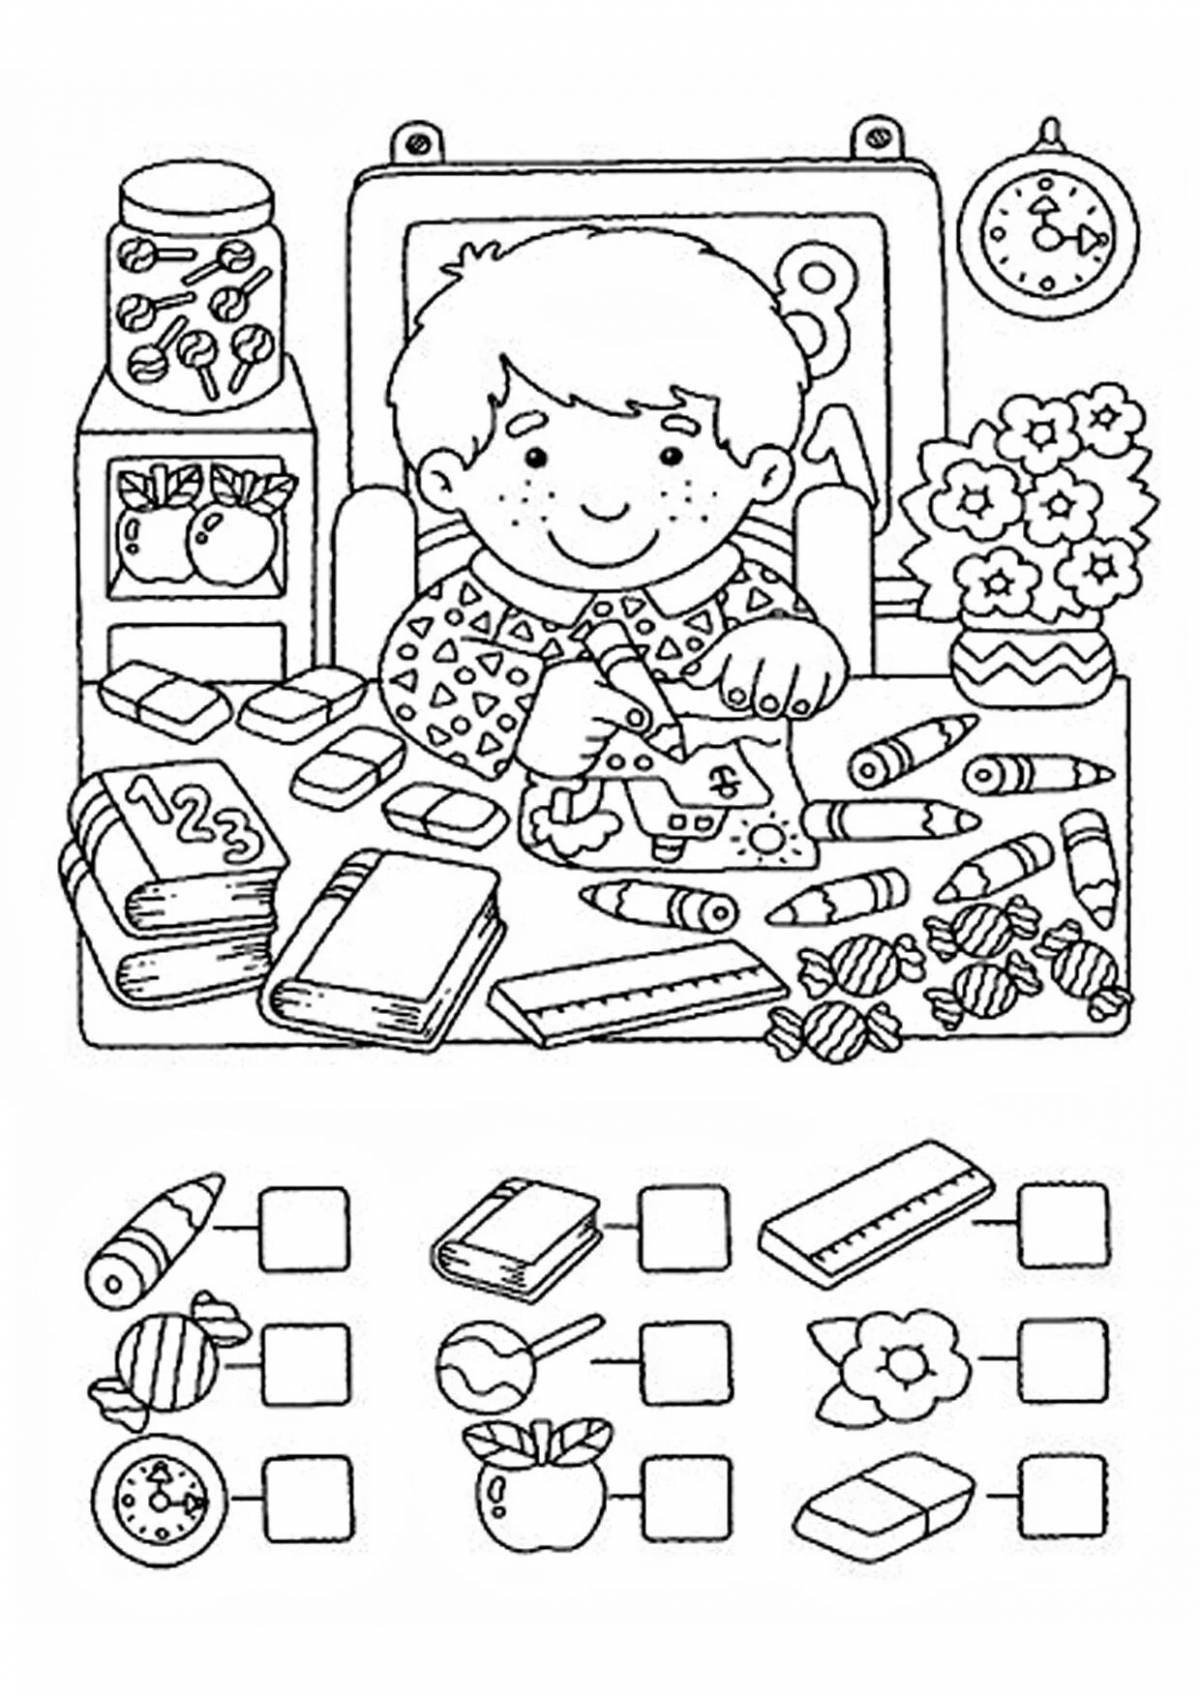 Coloring book happy getting ready for school